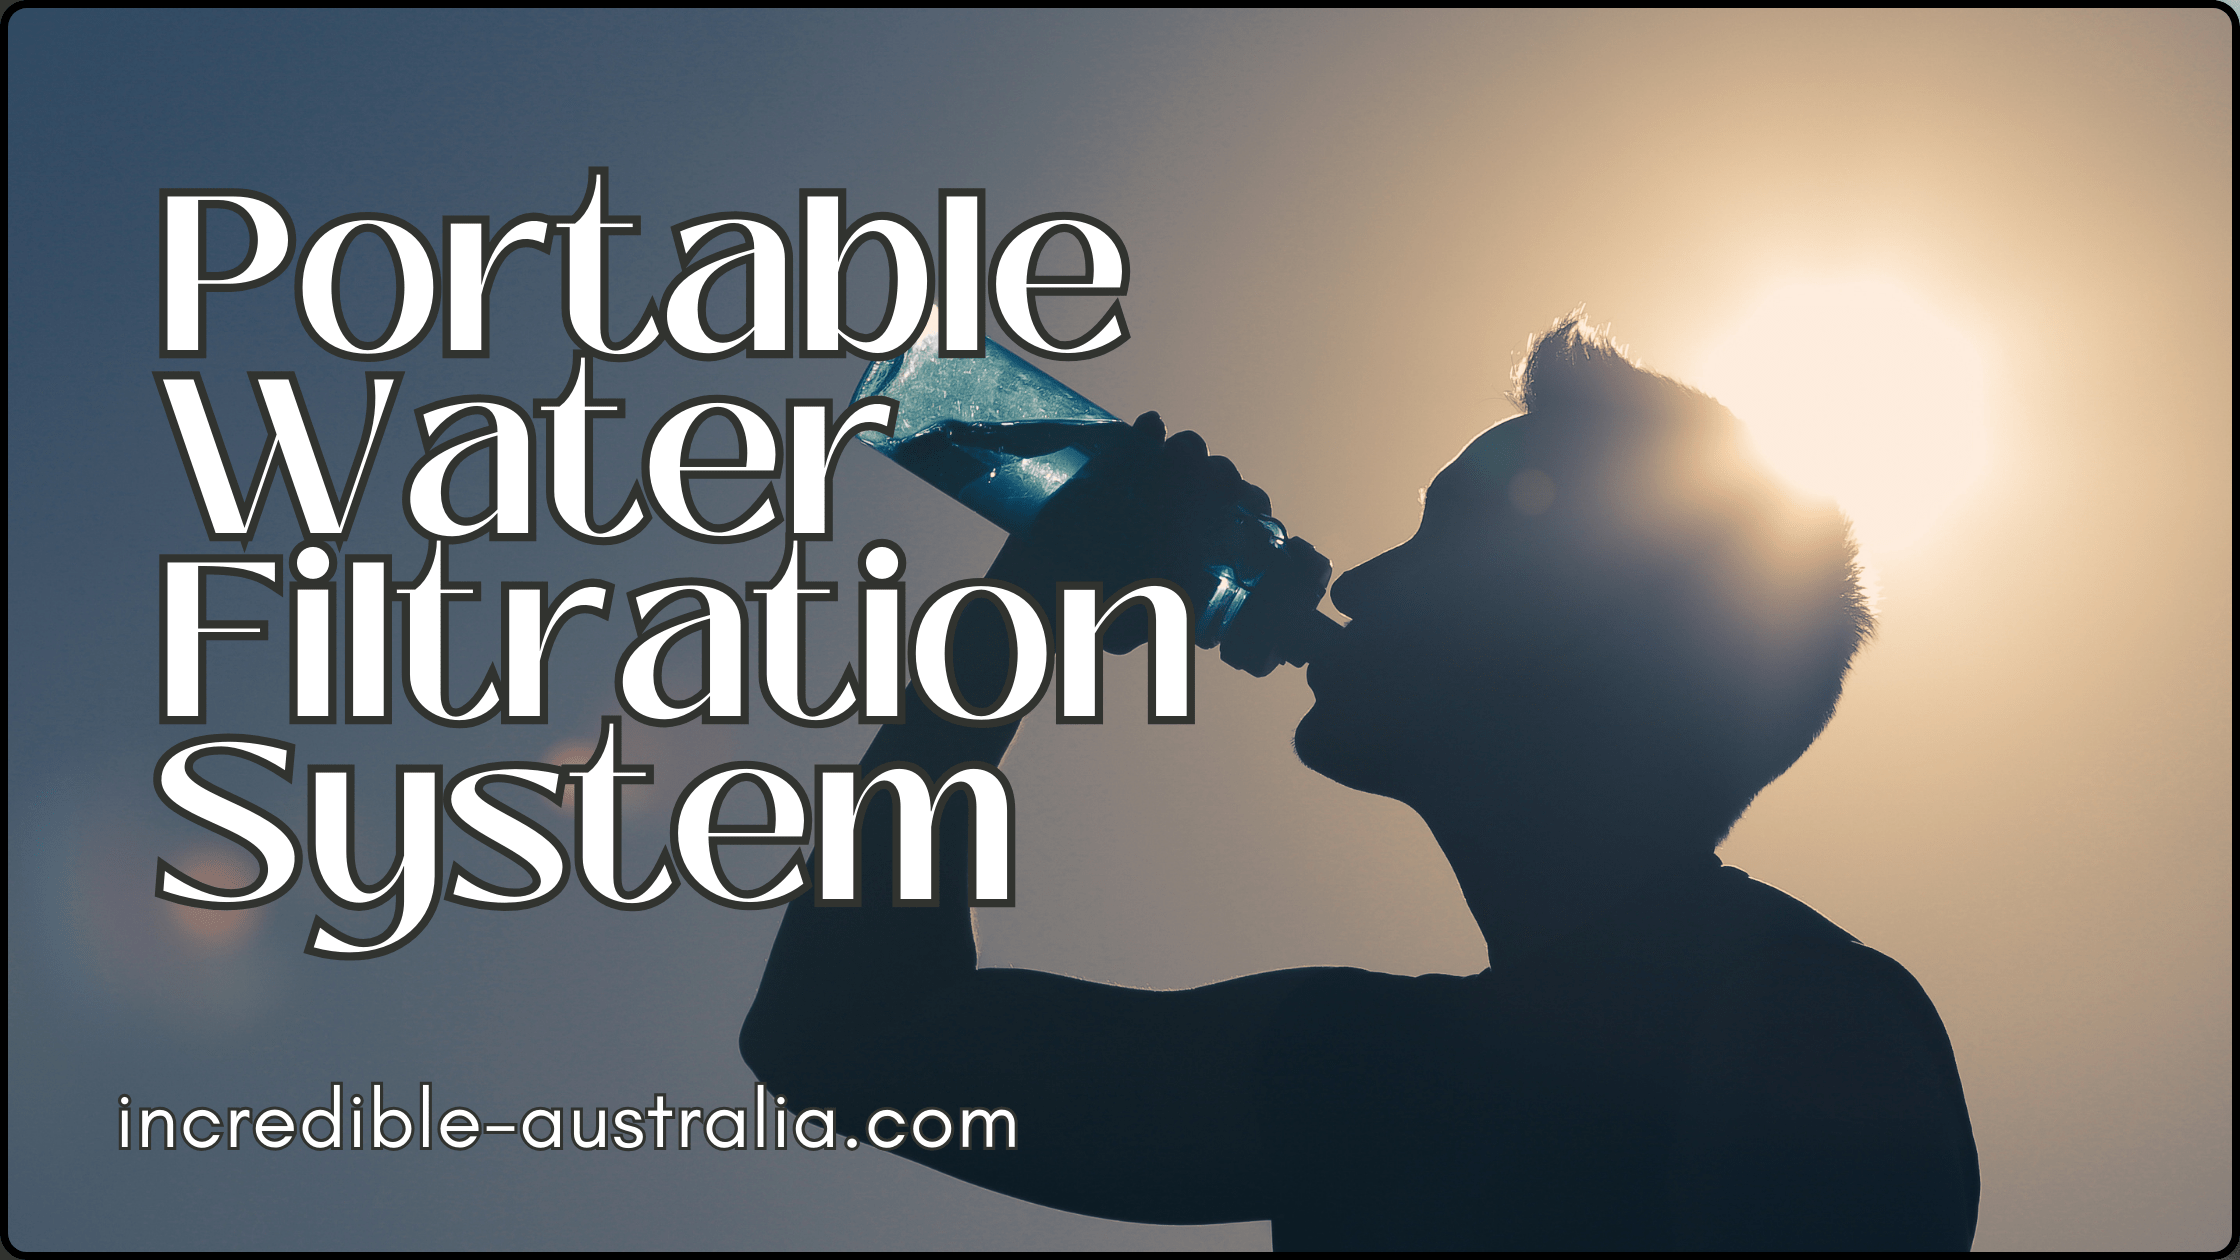 Portable Water Filtration System